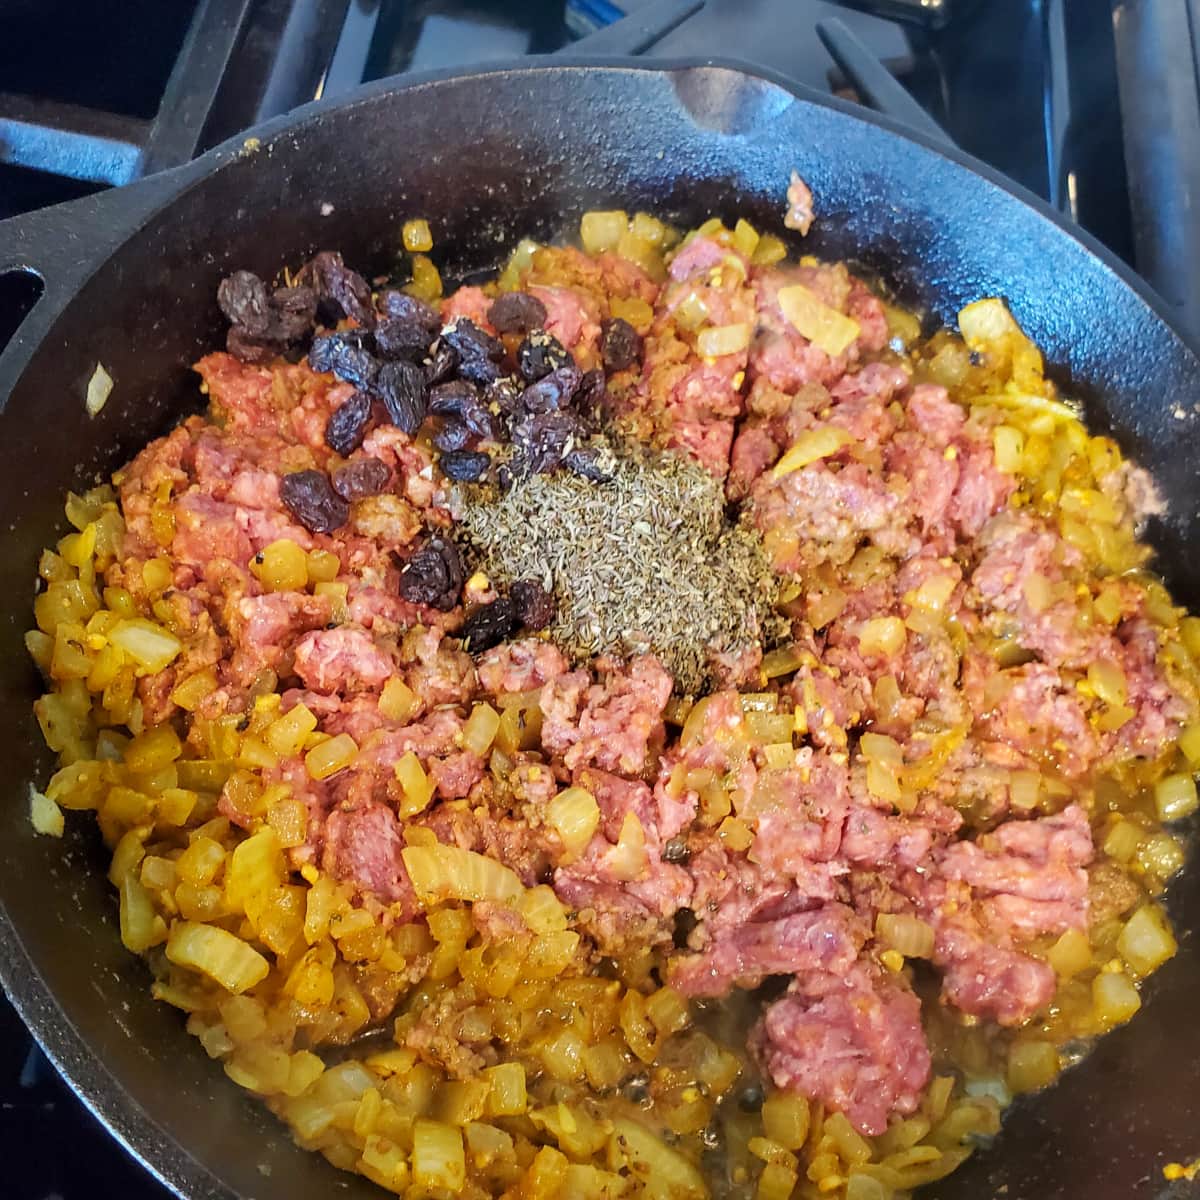 Raisins and herbs added to a pan of curried ground beef.